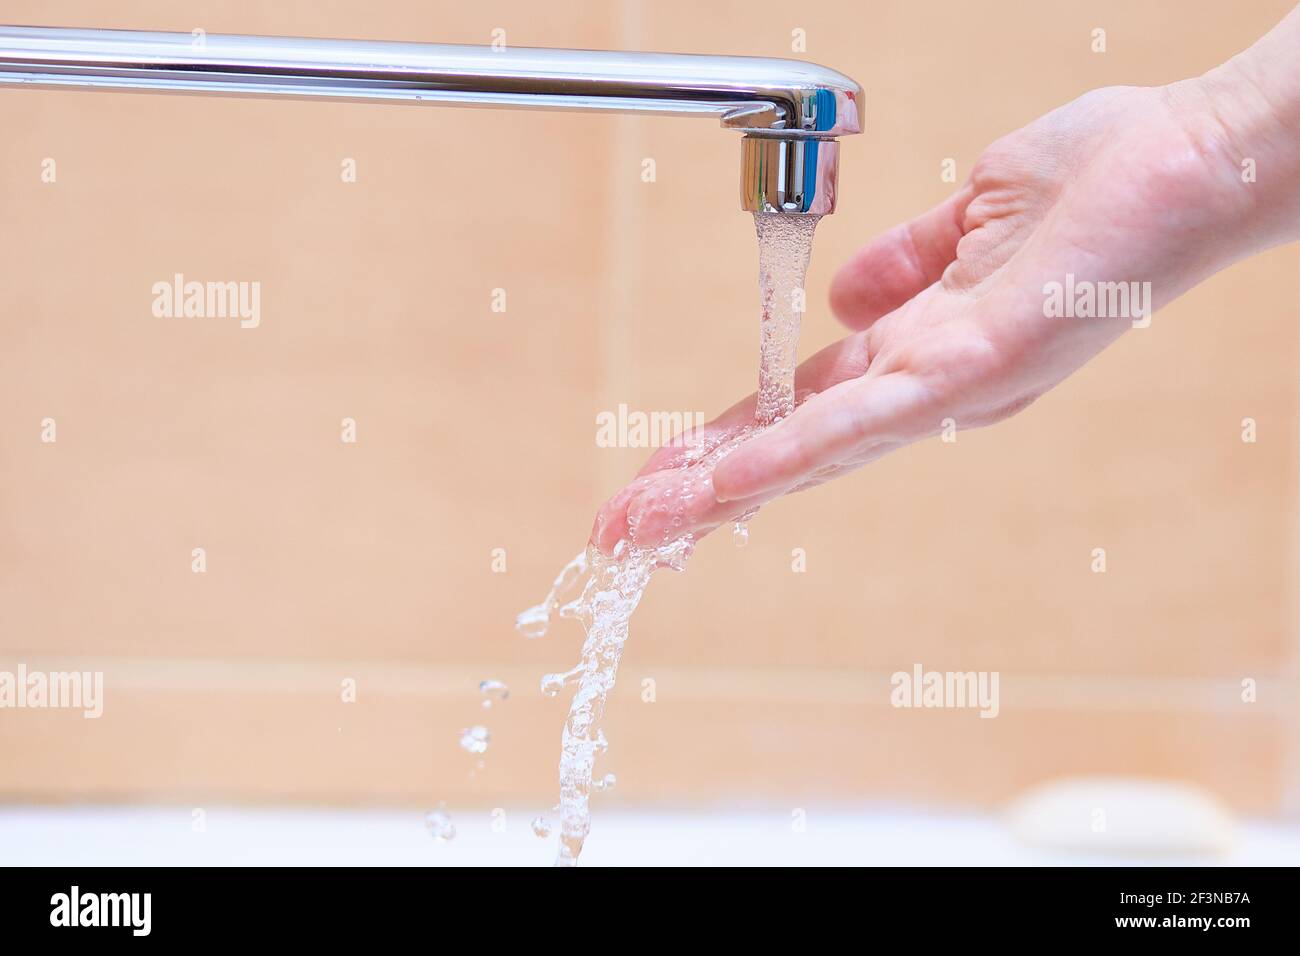 A woman's hand under the running water from the tap. Stock Photo